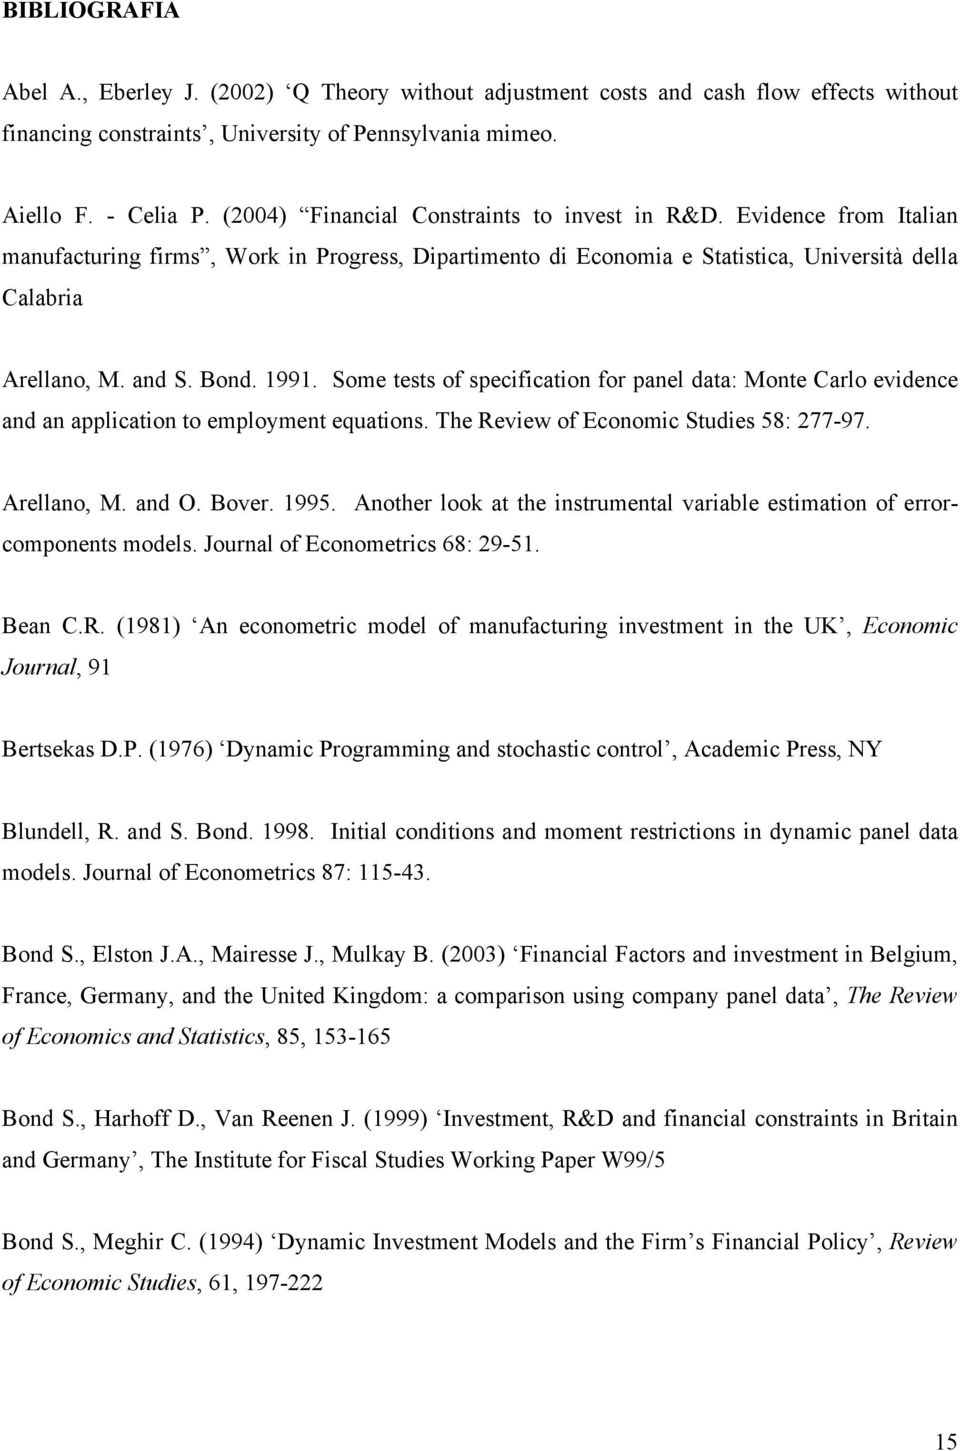 Some ess of specificaion for panel daa: Mone Carlo evidence and an applicaion o employmen equaions. The eview of Economic Sudies 58: 77-97. Arellano, M. and O. Bover. 995.